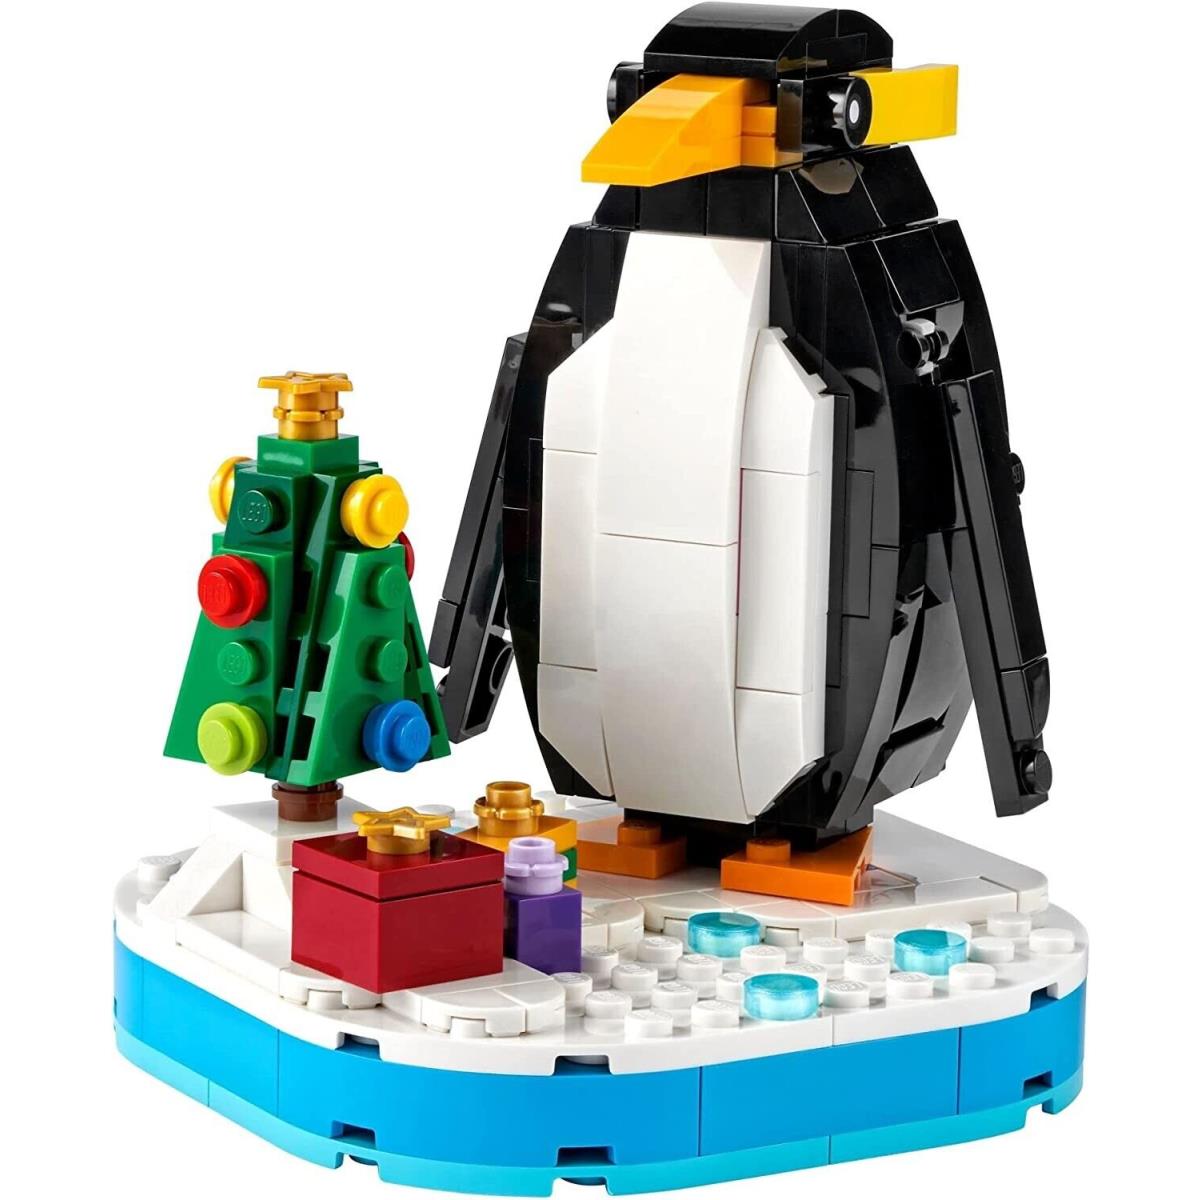 Lego 40498 Christmas Holidays Set Penguin with Tree Rare 244 Piece Toy For Kids